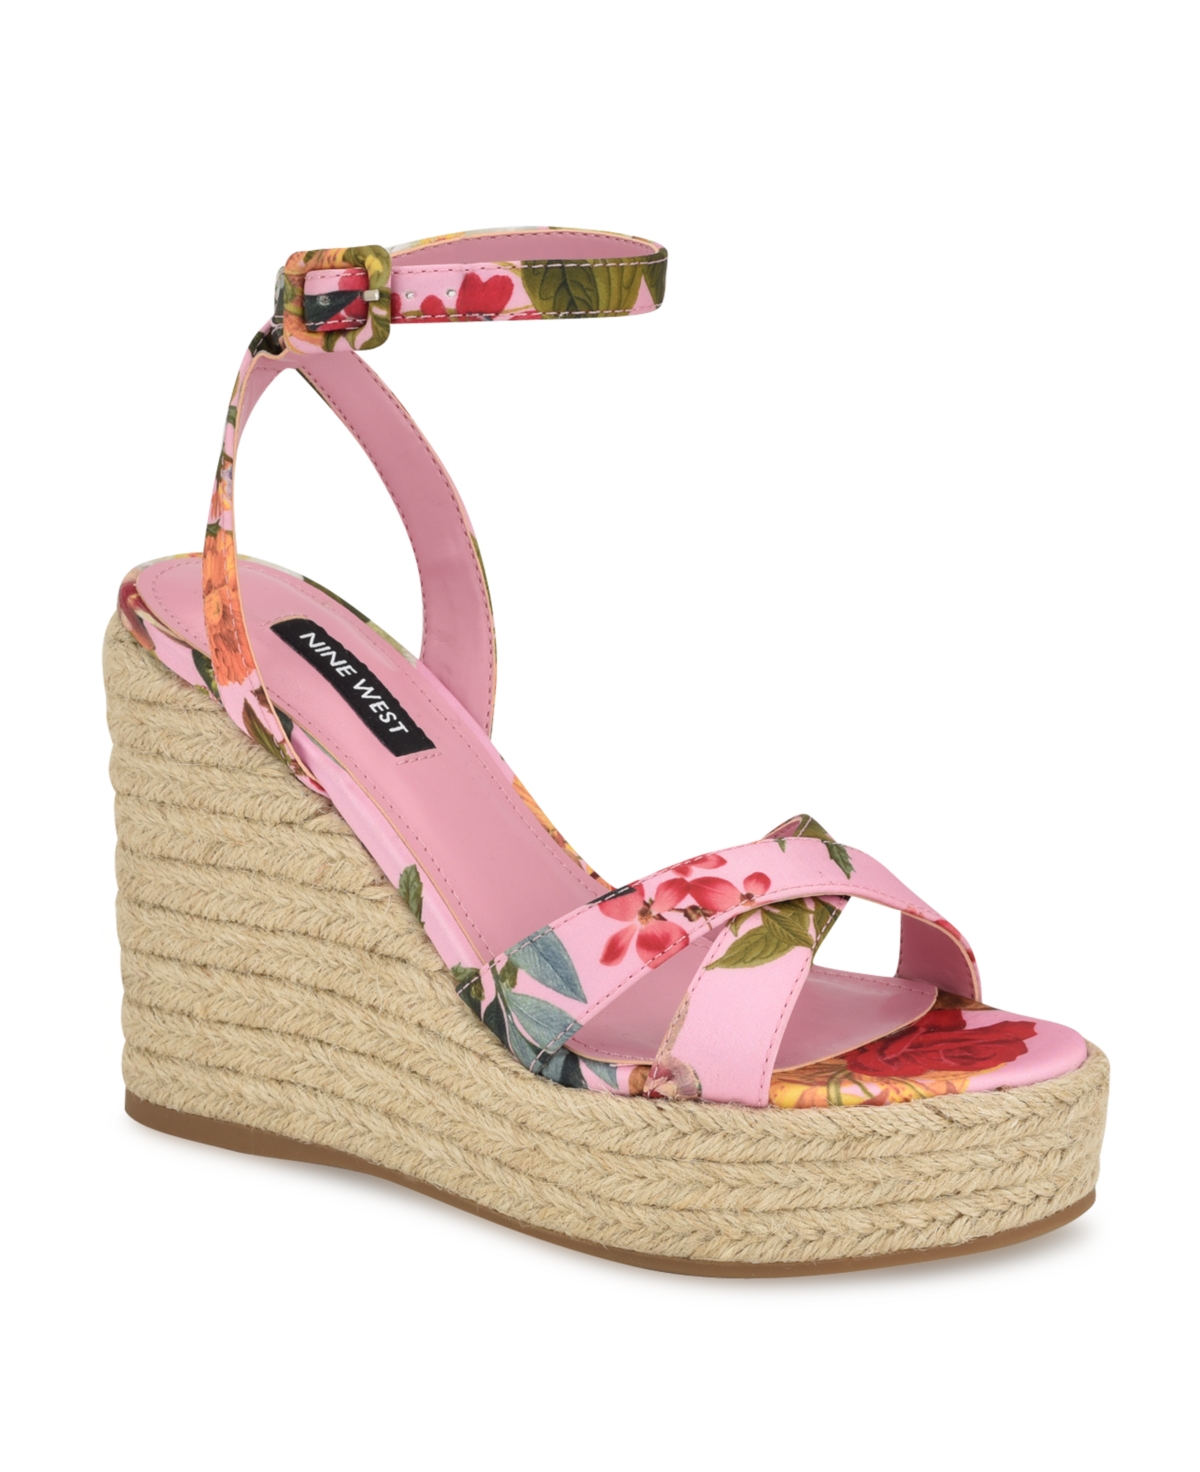 Nine West Women's Earnit Round Toe Ankle Strap Wedge Sandals In Pink Rose Print Satin